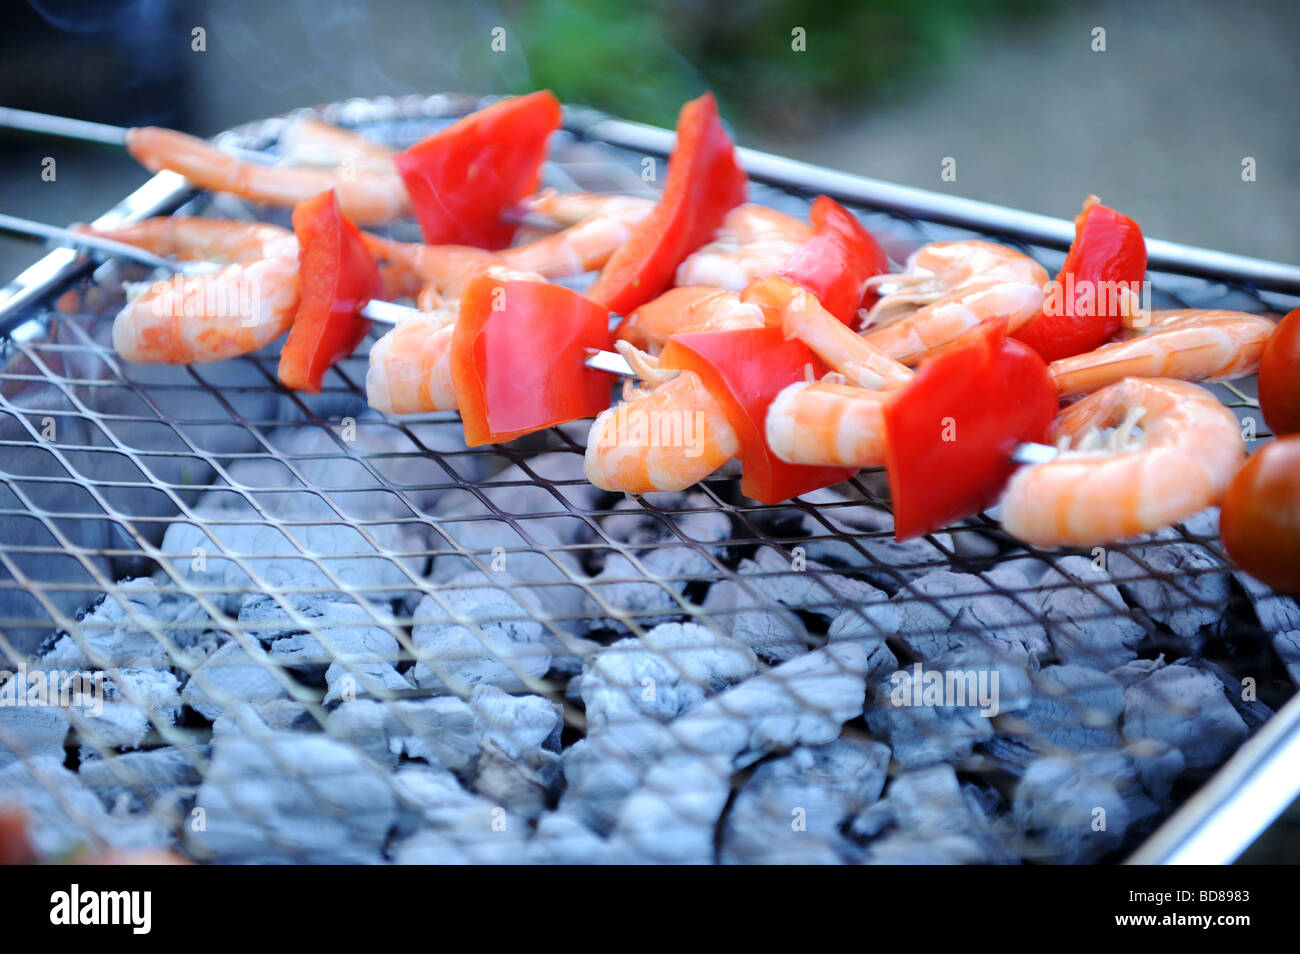 Fresh prawns and red pepper cooking on a disposable barbecue Stock Photo